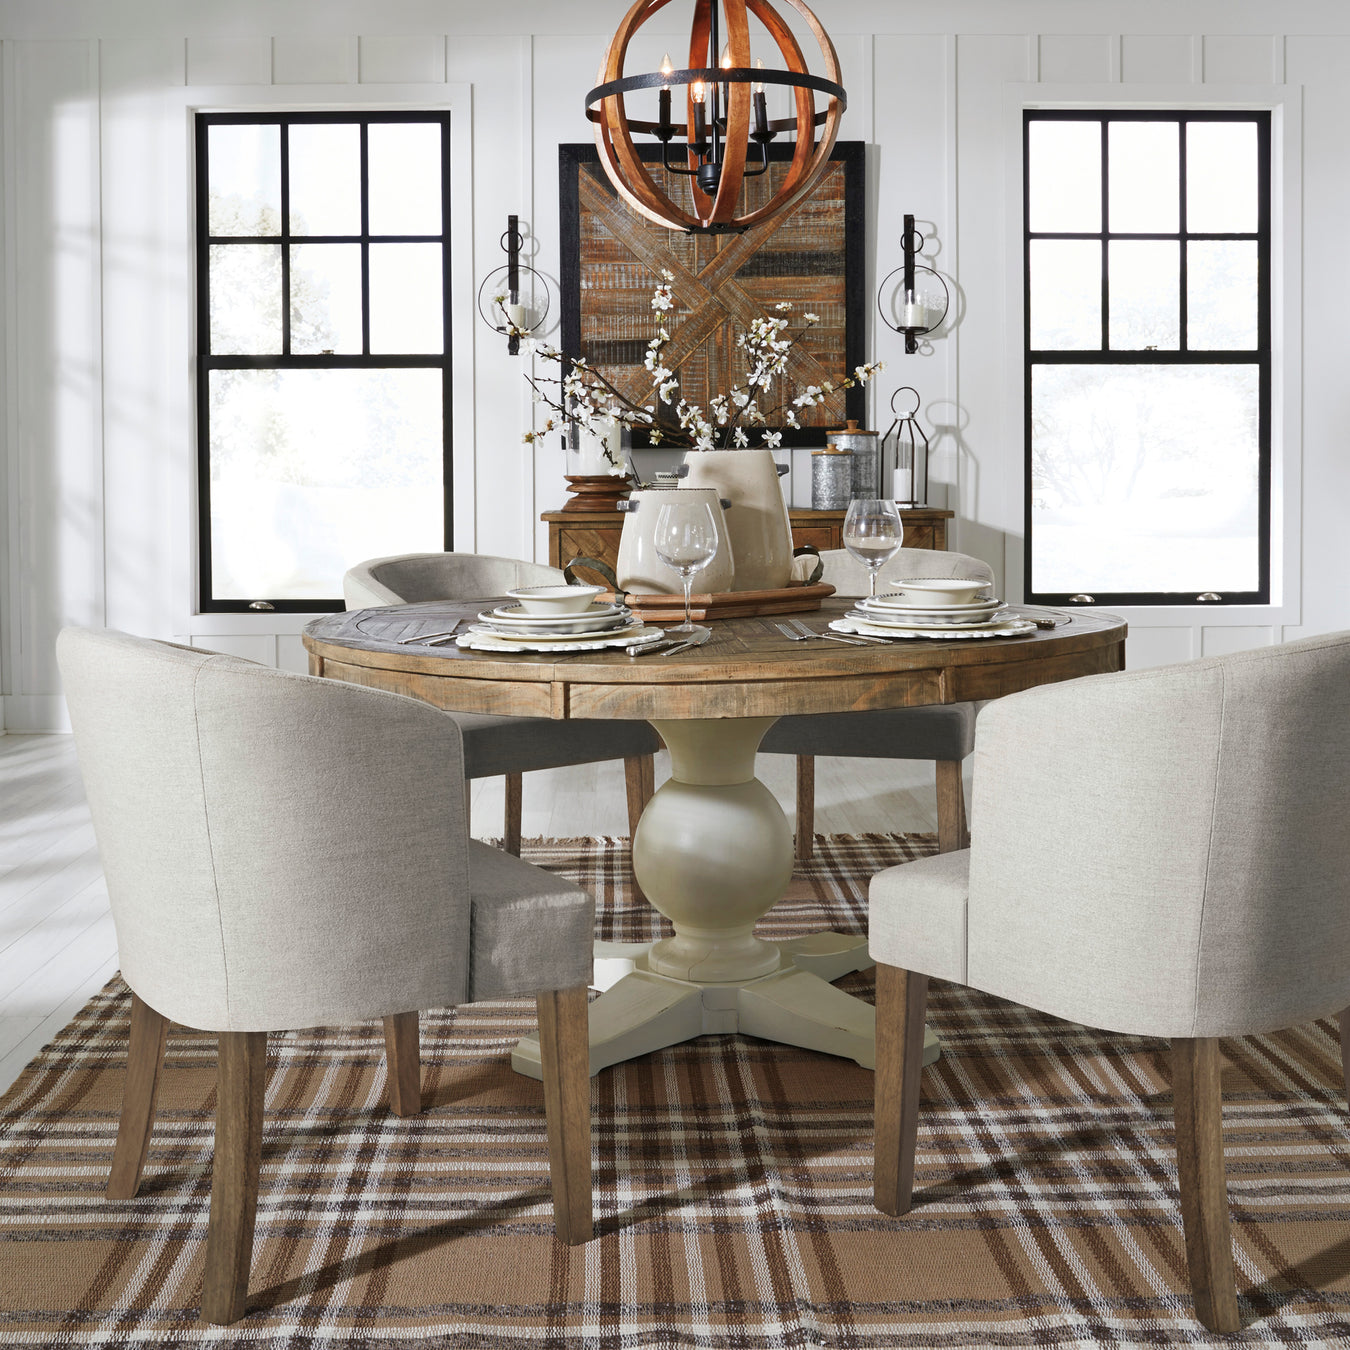 Shop Dining Room Furniture at Capital Discount Furniture in Durham, NC